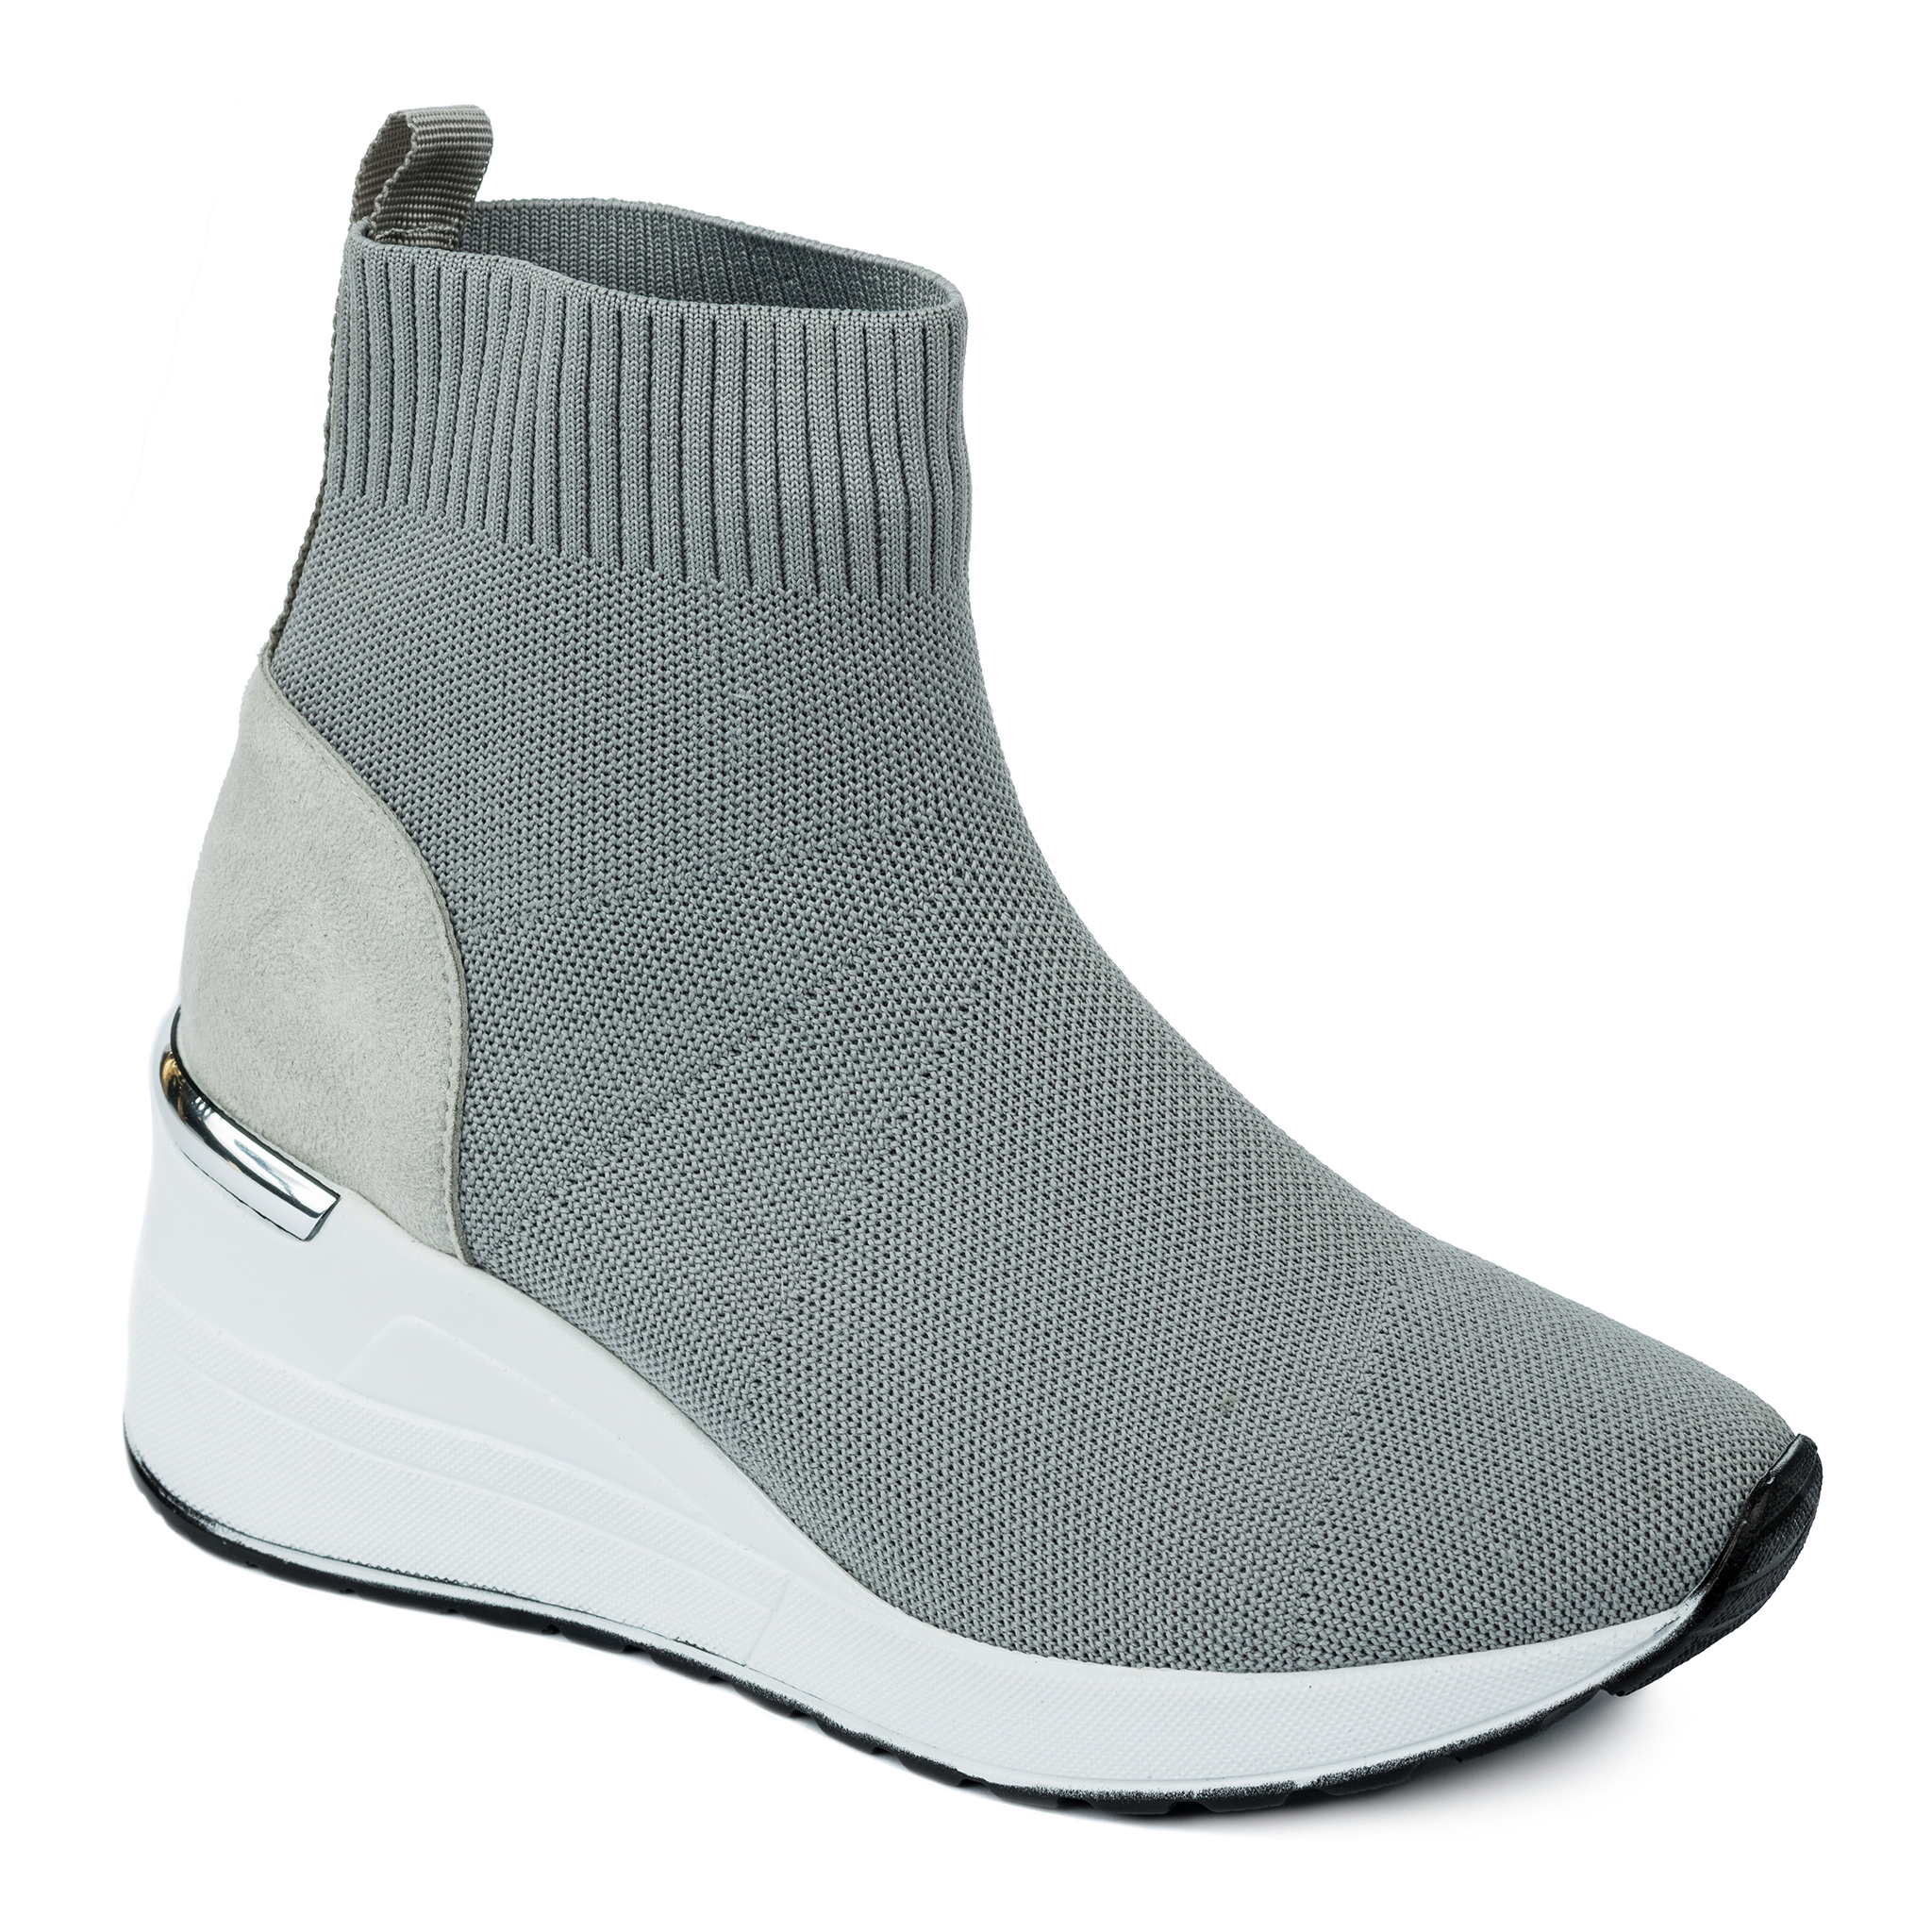 STRETCH ANKLE SNEAKERS - GRAY